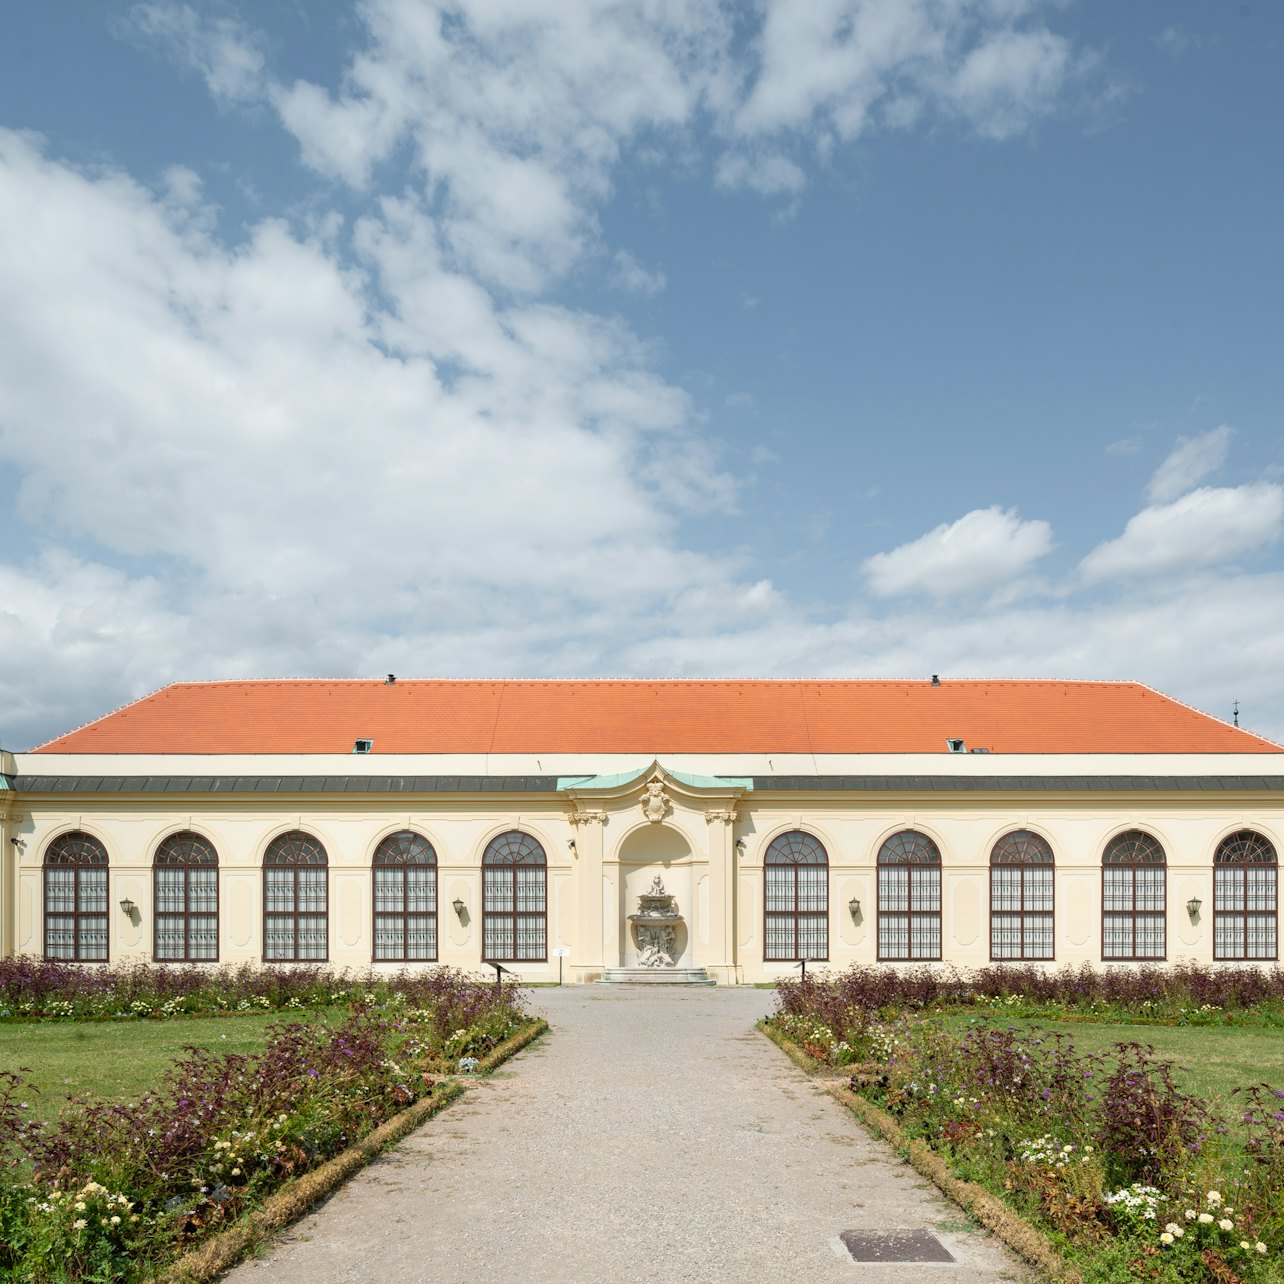 Belvedere Palace: Lower Belvedere - Accommodations in Vienna